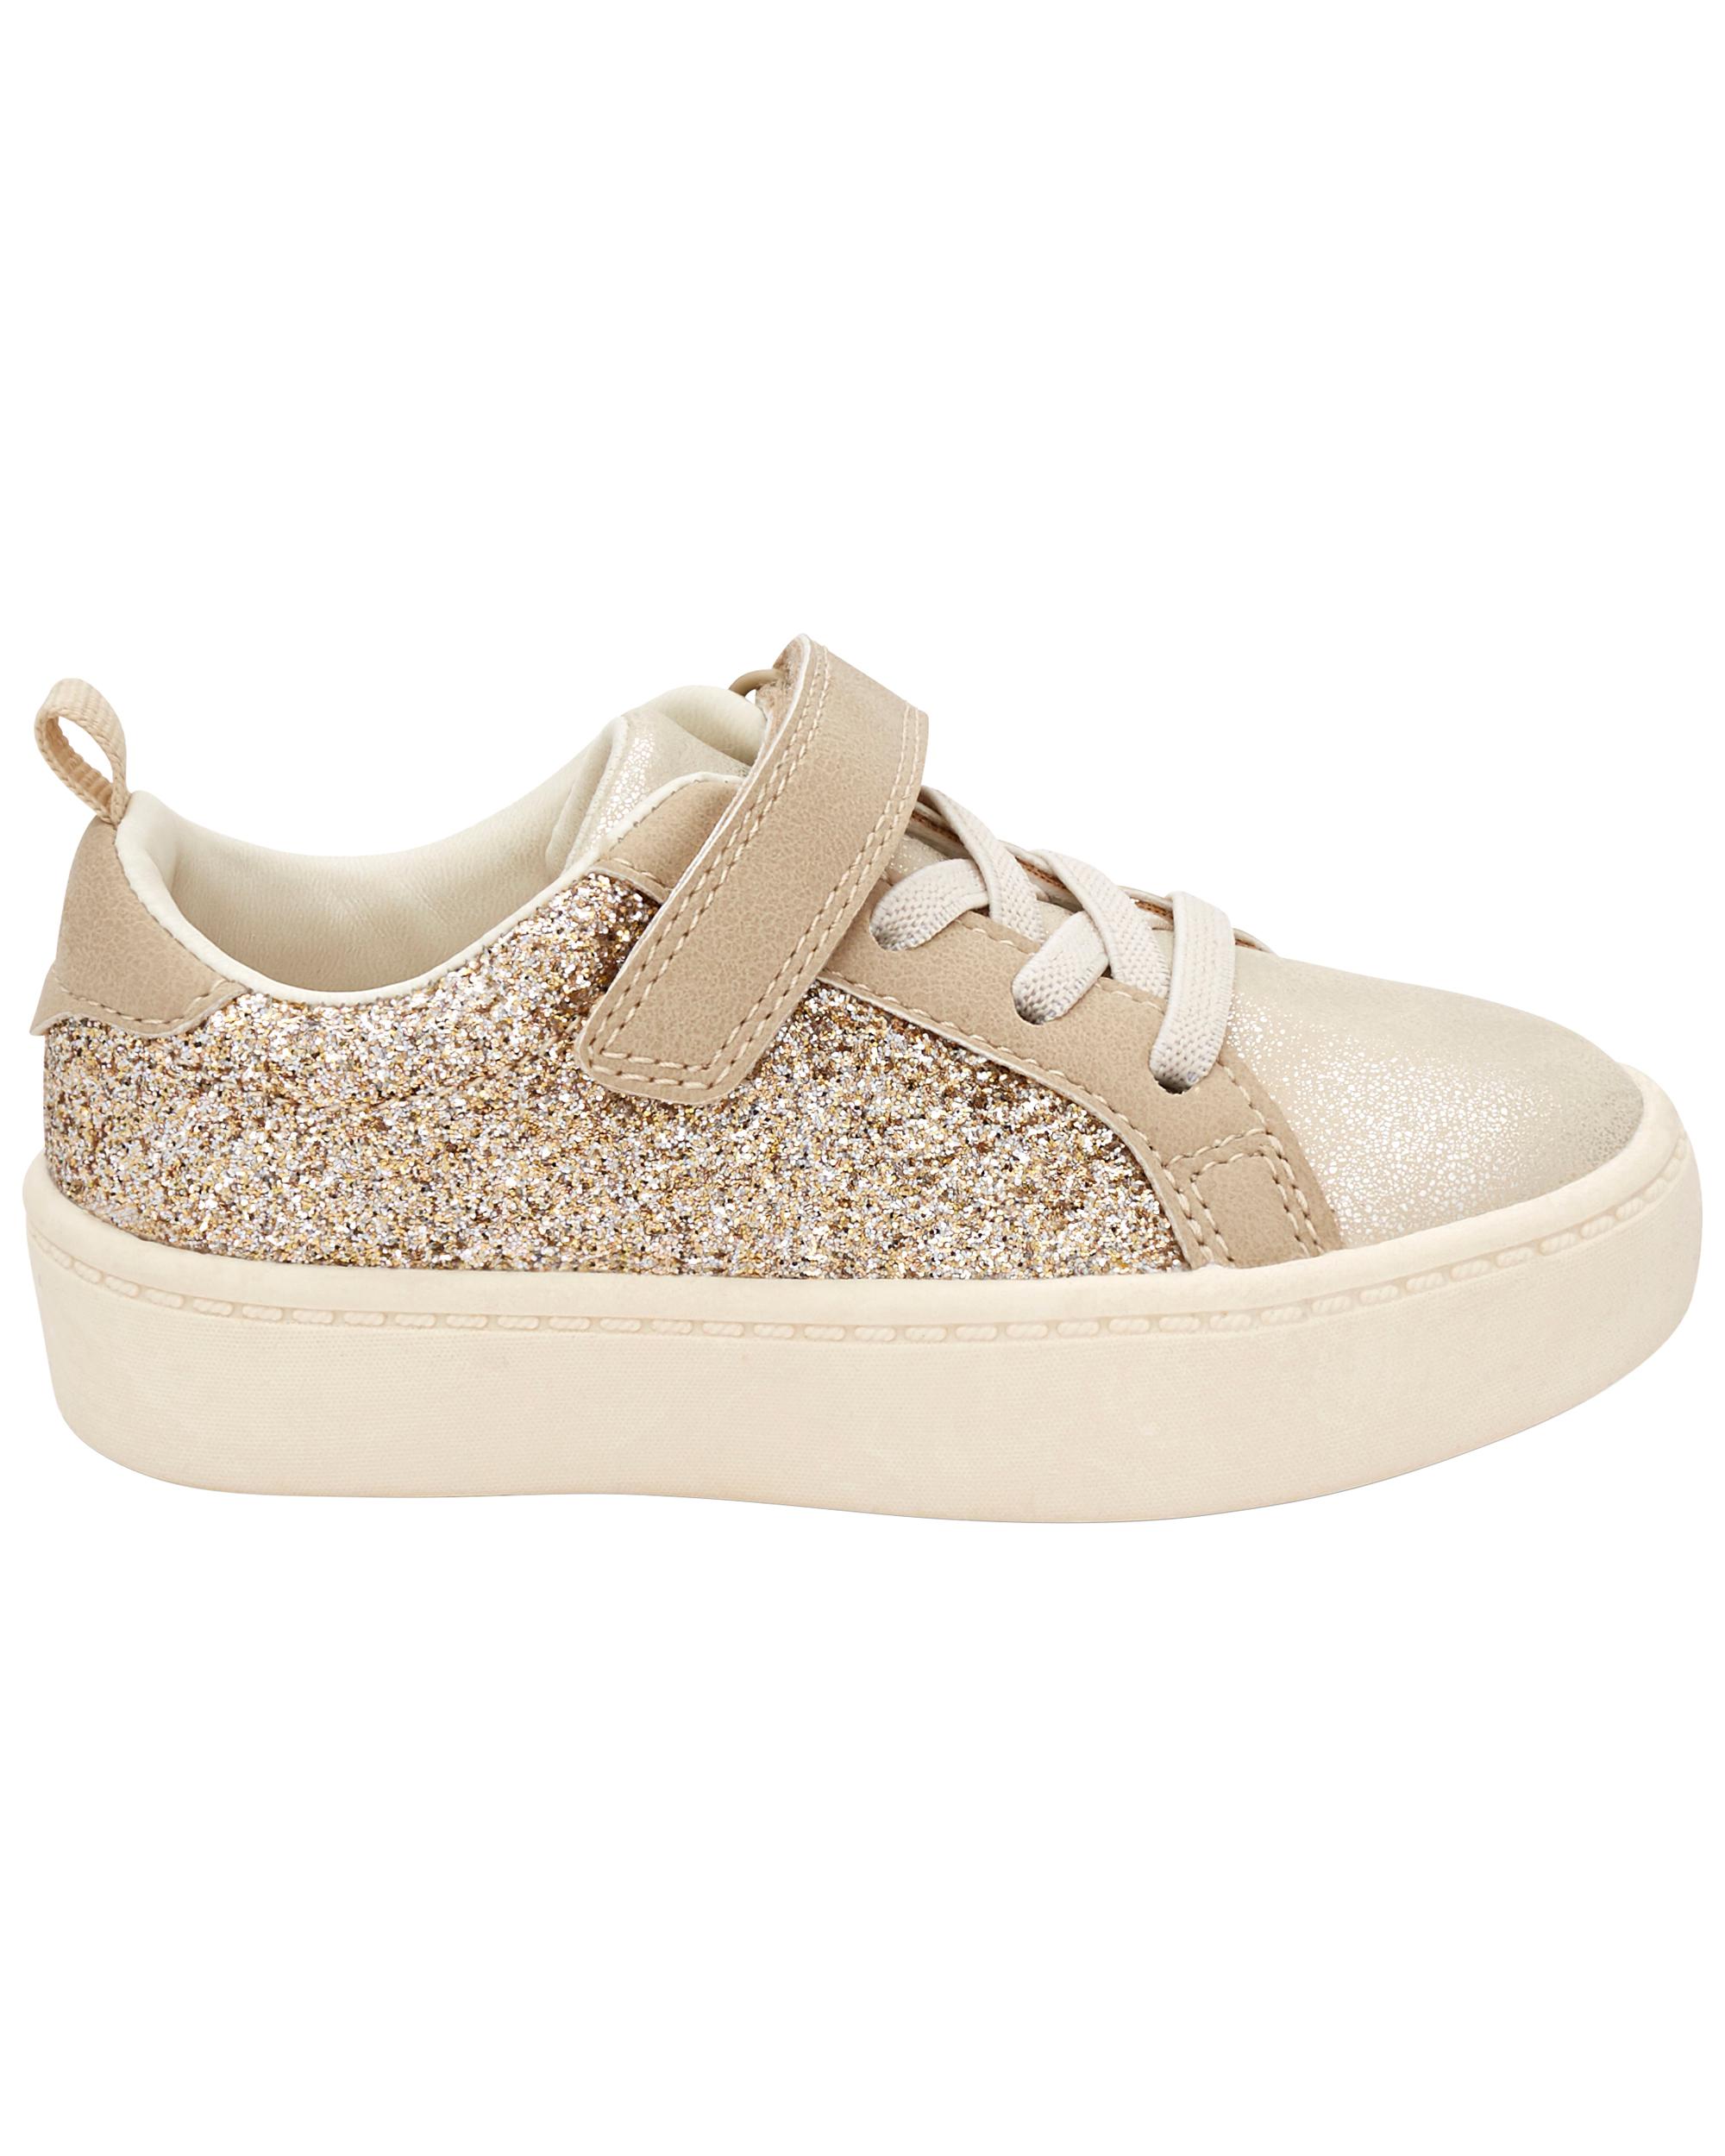 Gold Toddler Shoes Glitter Sneakers | carters.com